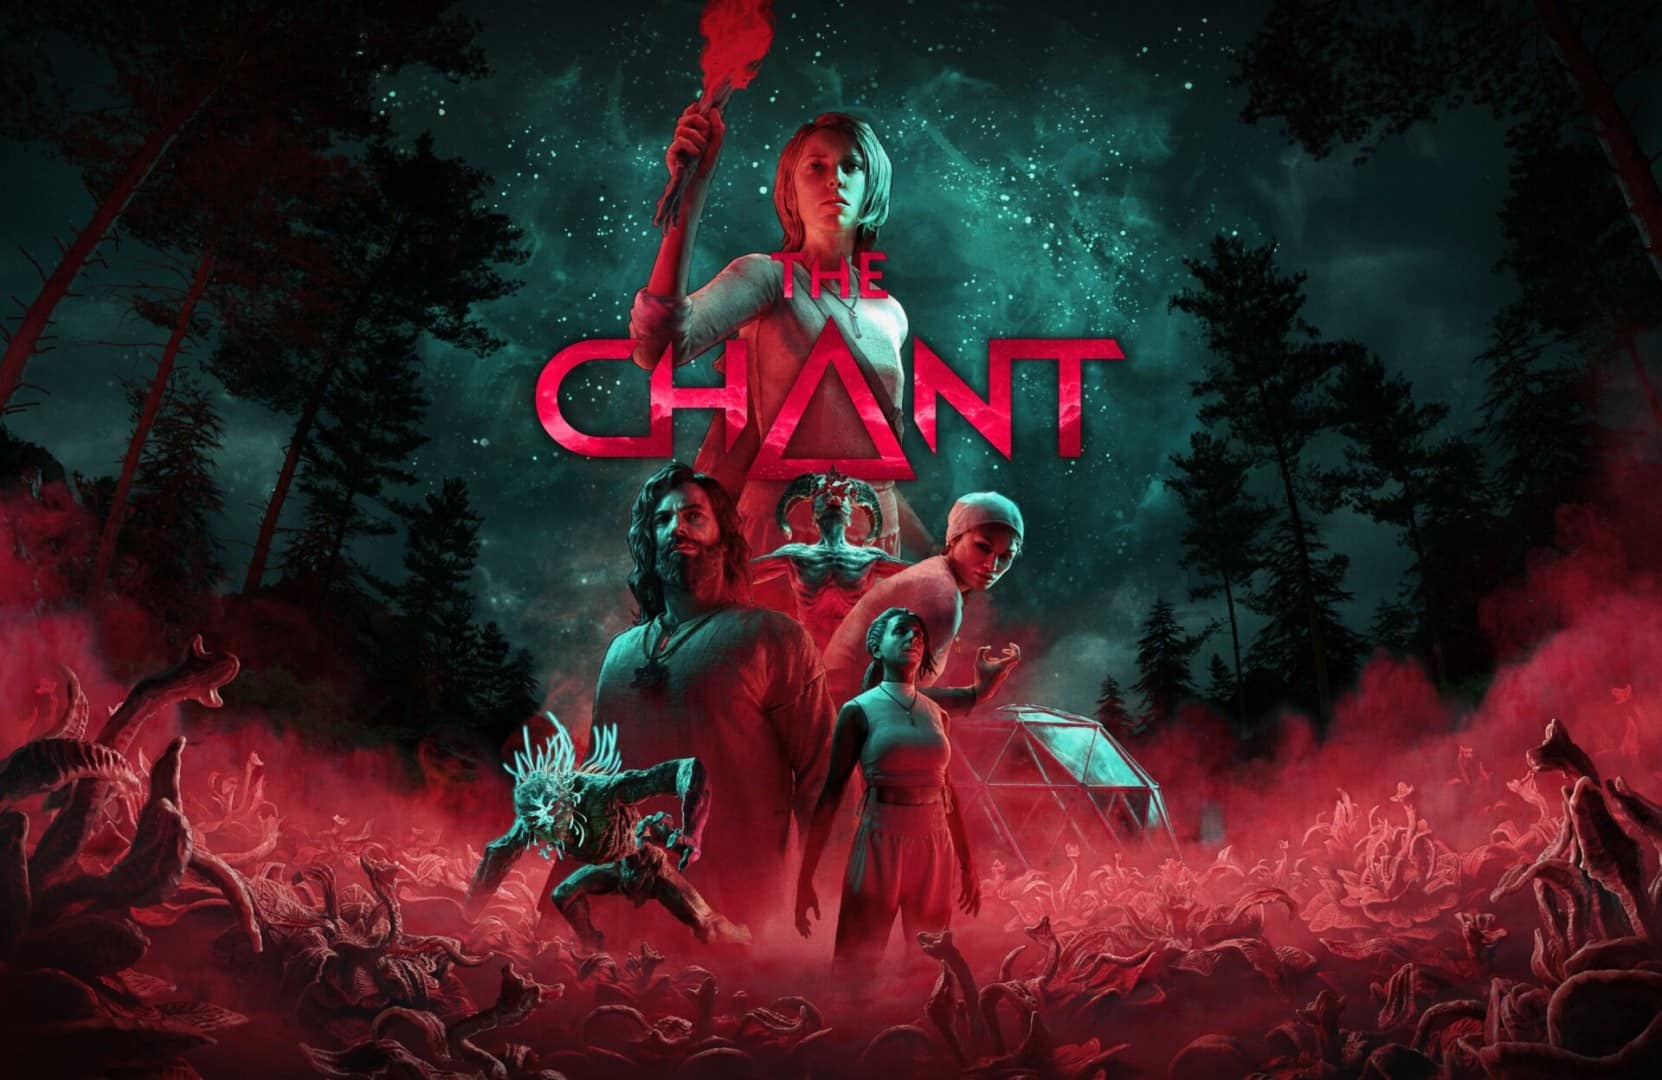 The Chant Limited Edition Cover